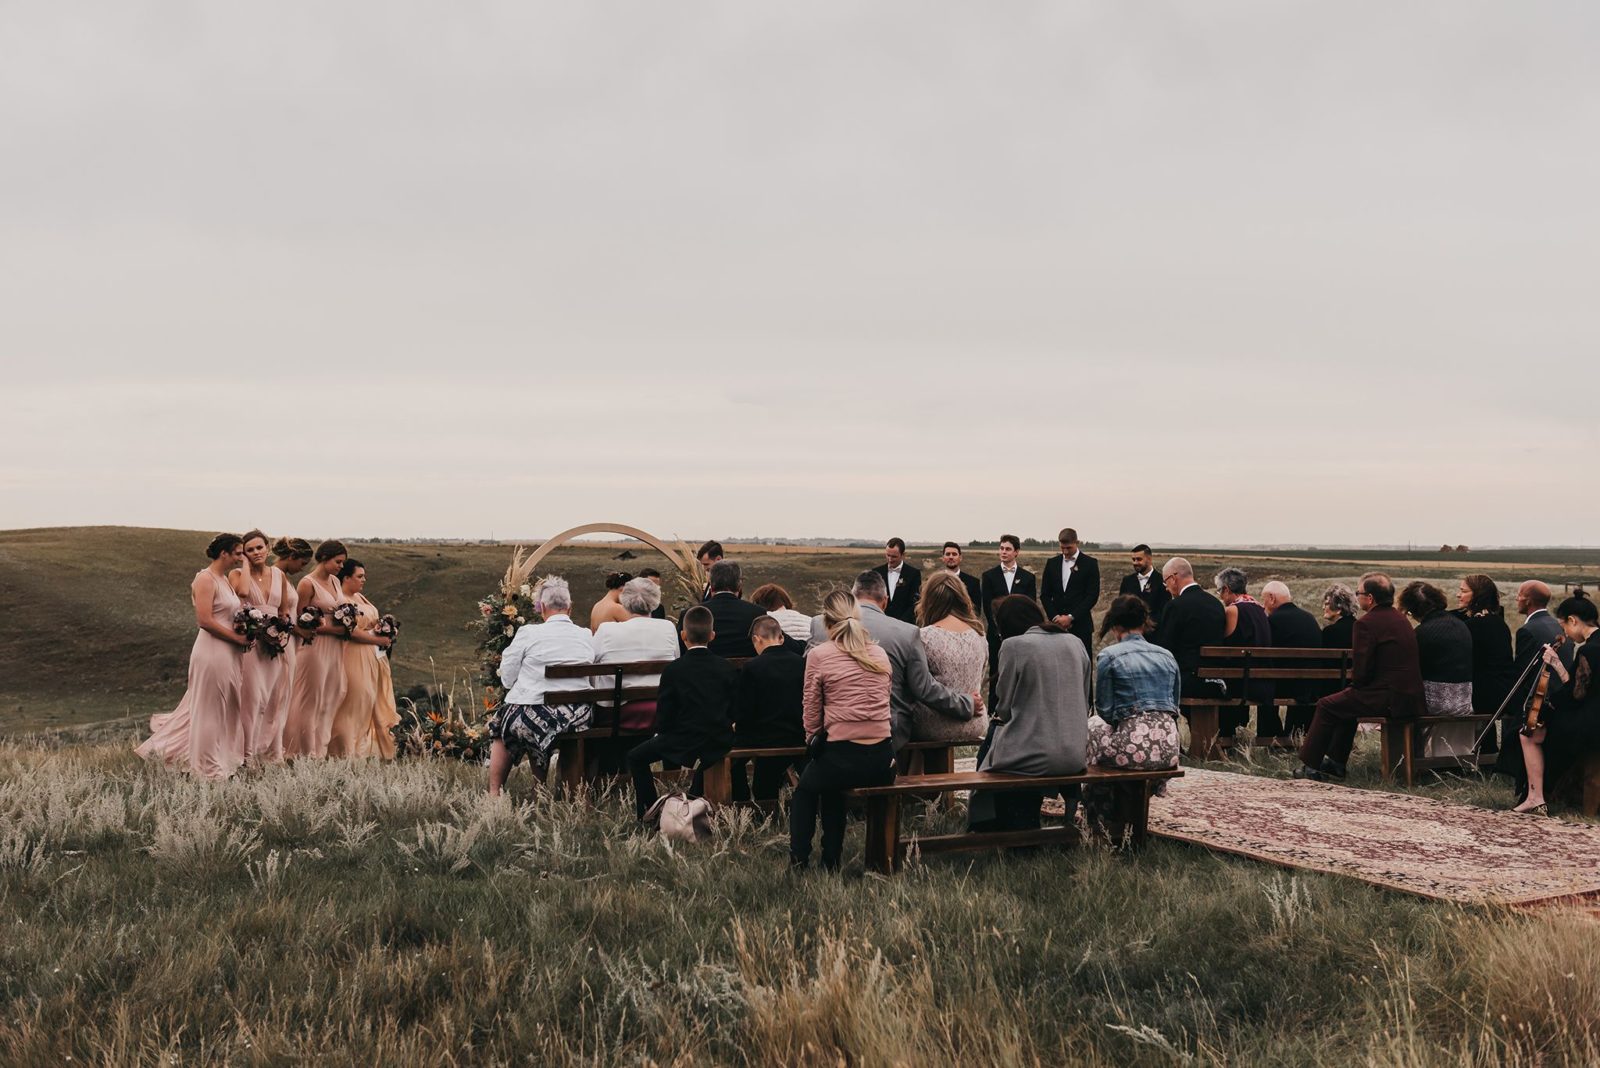 Real Wedding - Countryside Nuptials & Moroccan Styled Reception - featured on Junebug and Bronte Bride, intimate wedding ceremony, outdoor alberta wedding